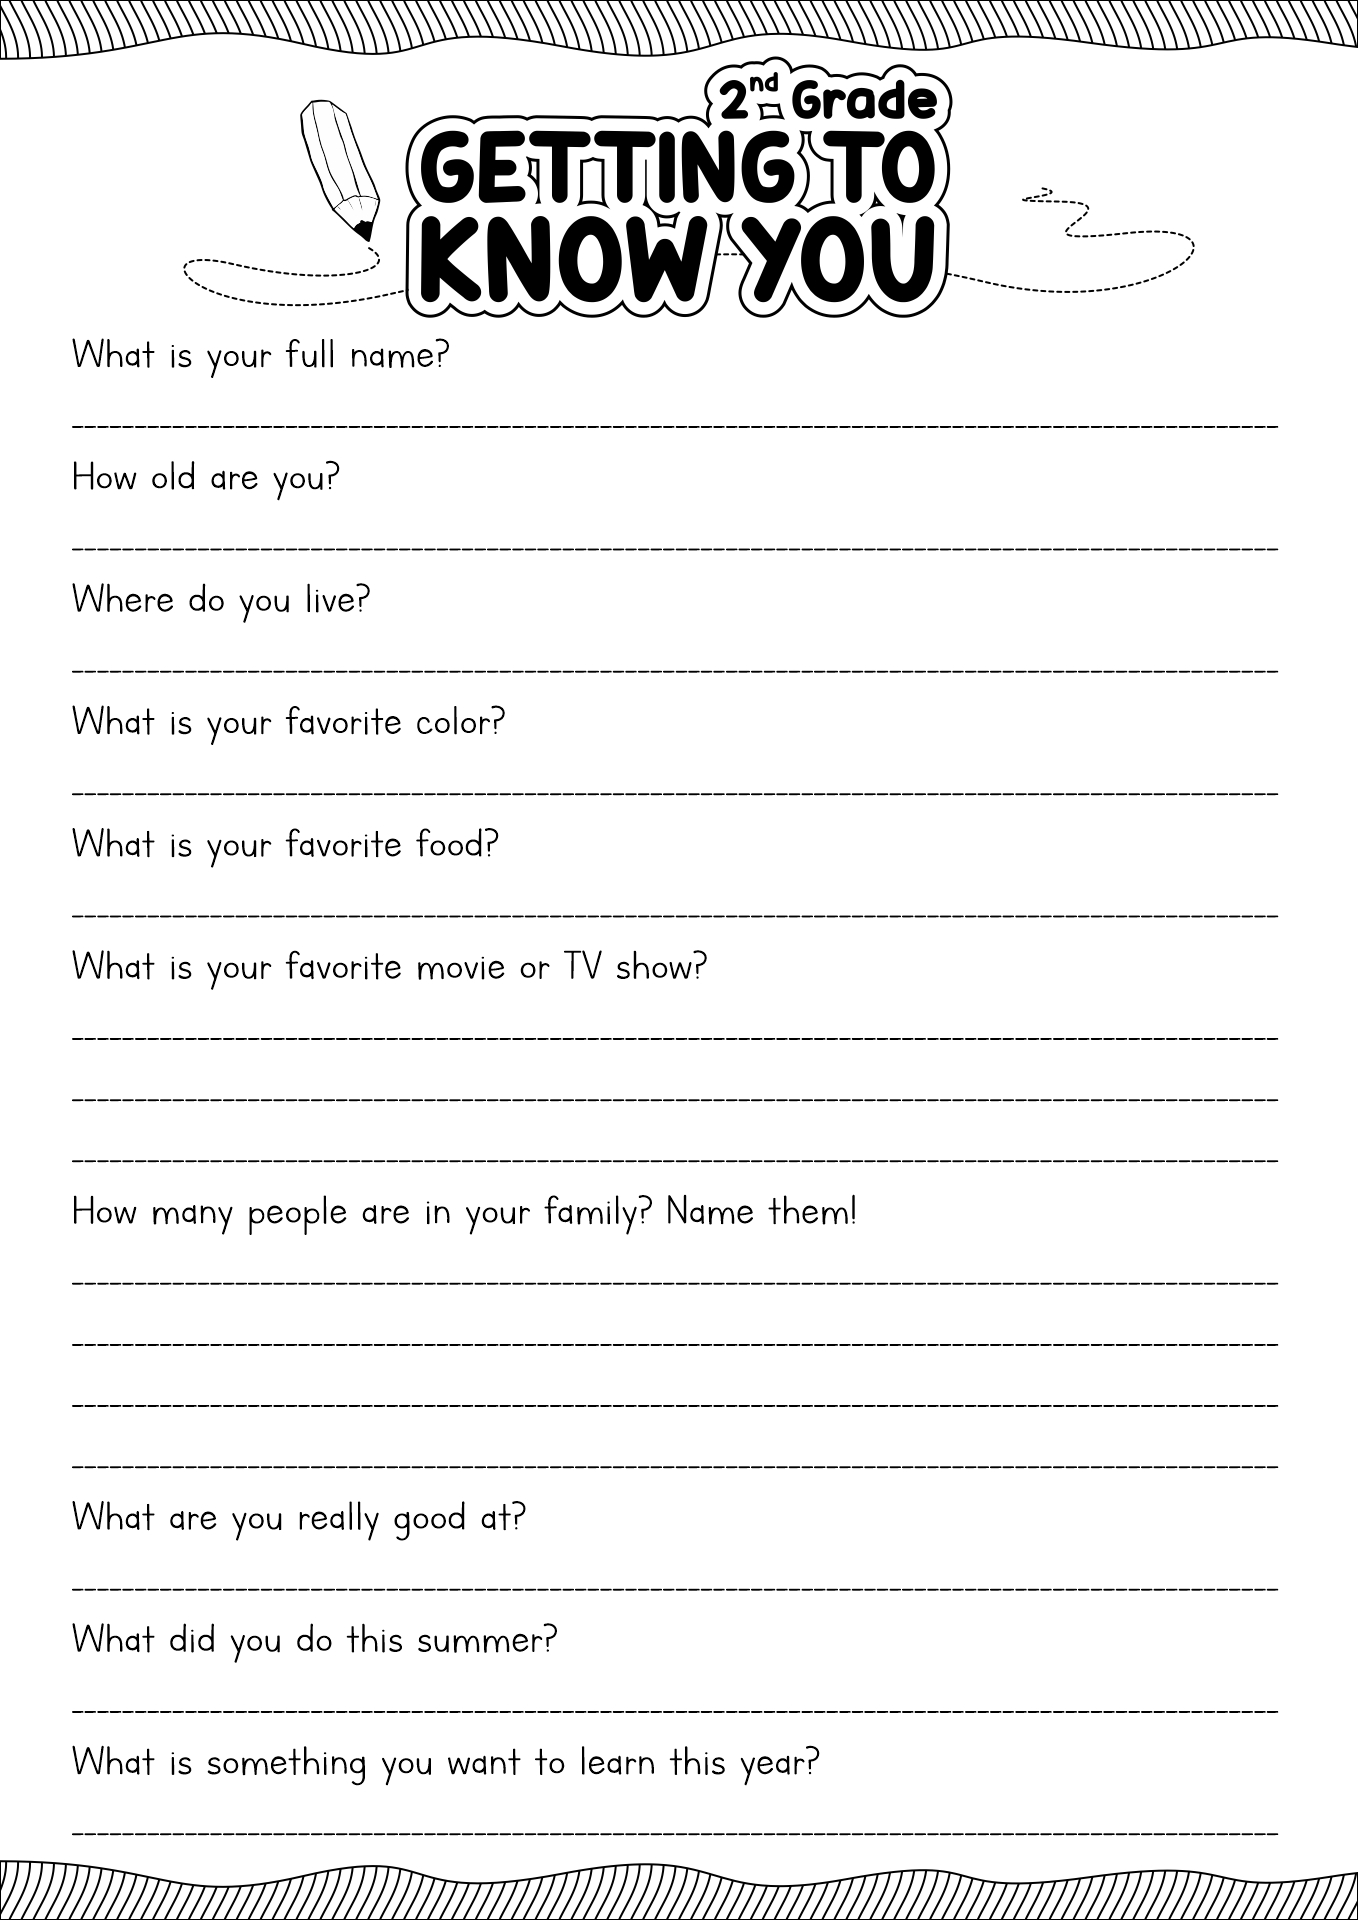 Getting to Know You Worksheets 2nd Grade